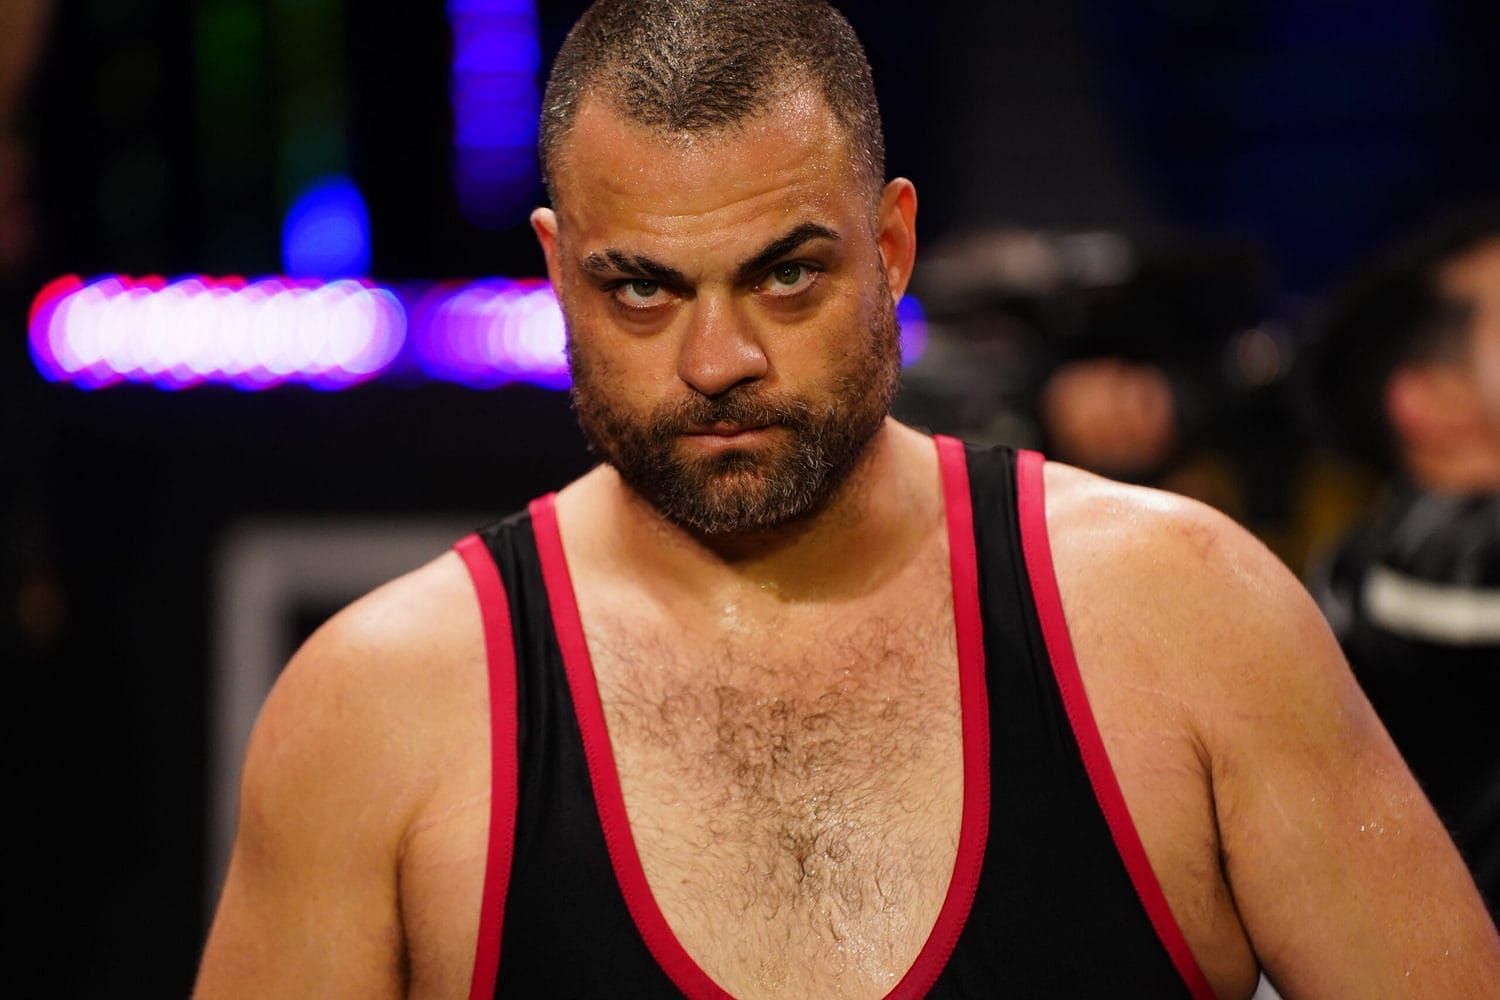 Eddie Kingston is now involved in a feud with Chris Jericho in AEW